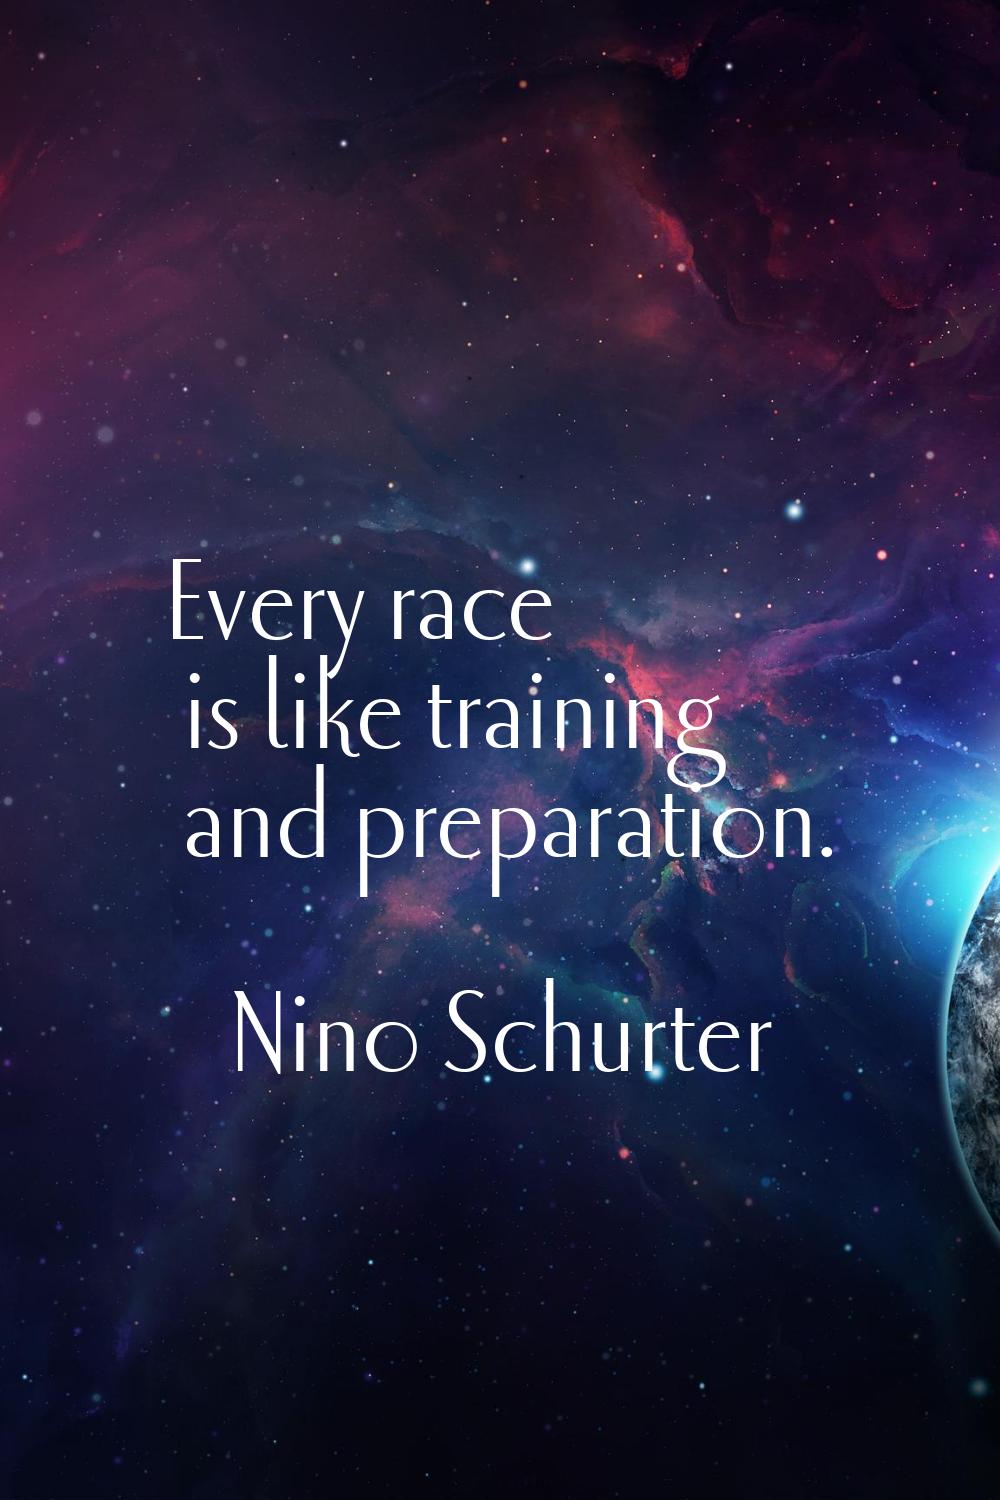 Every race is like training and preparation.